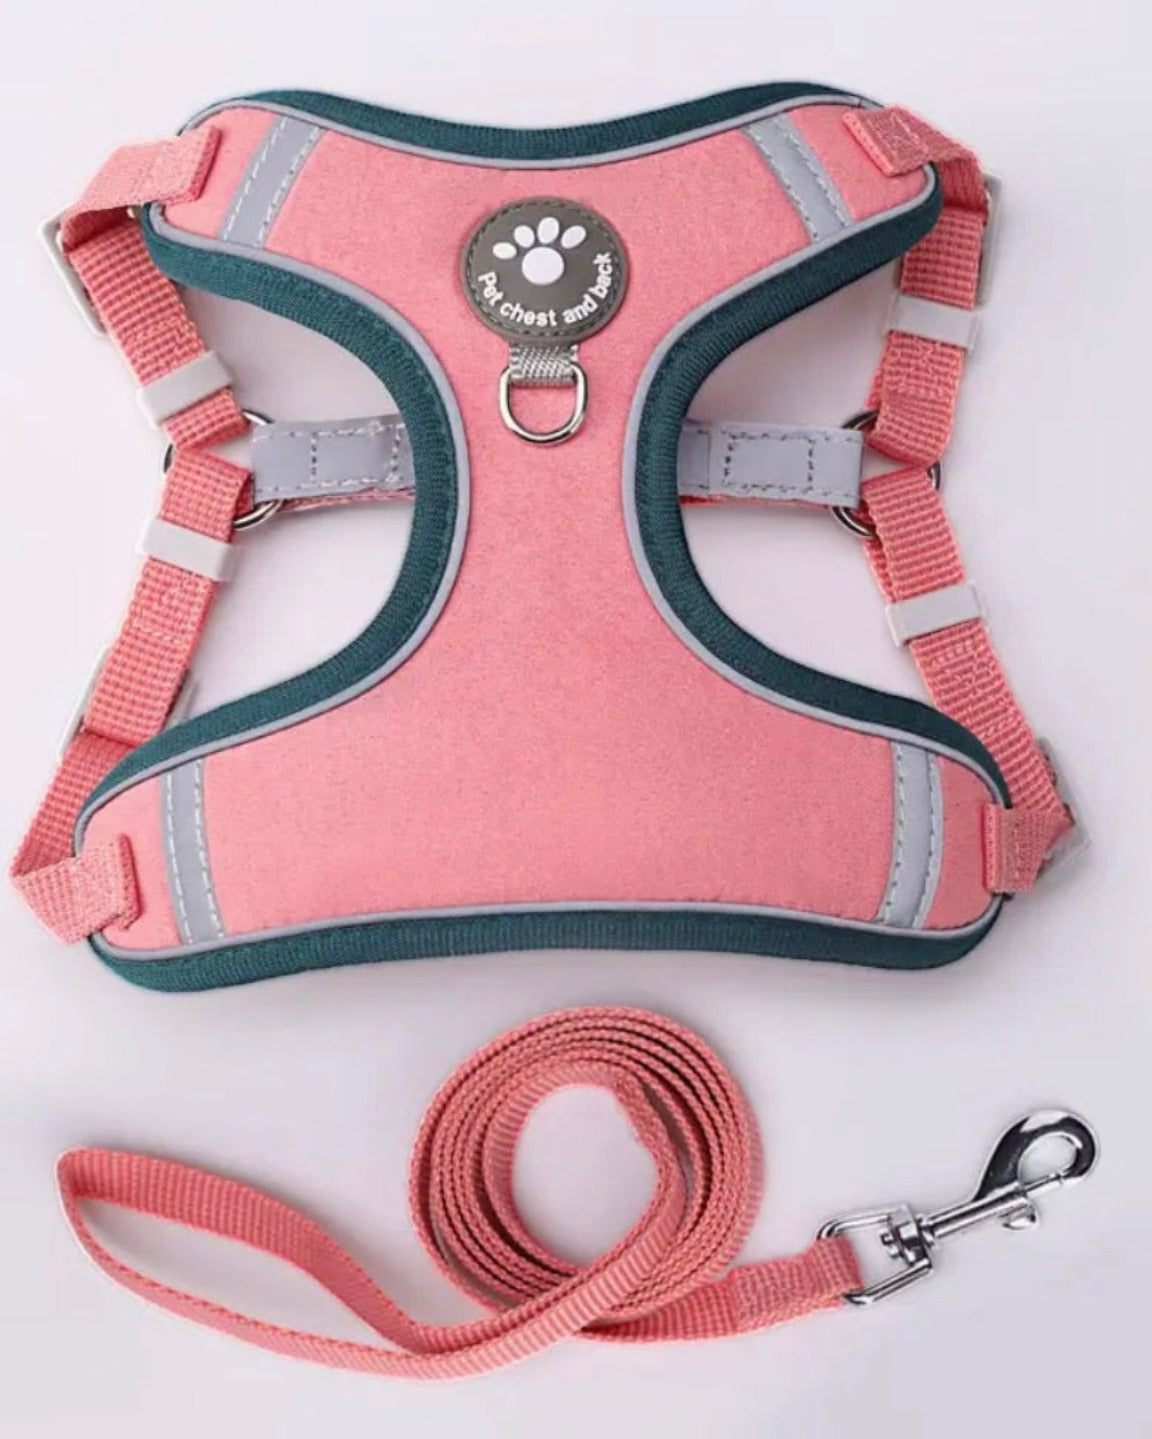 The adjustable sports harness